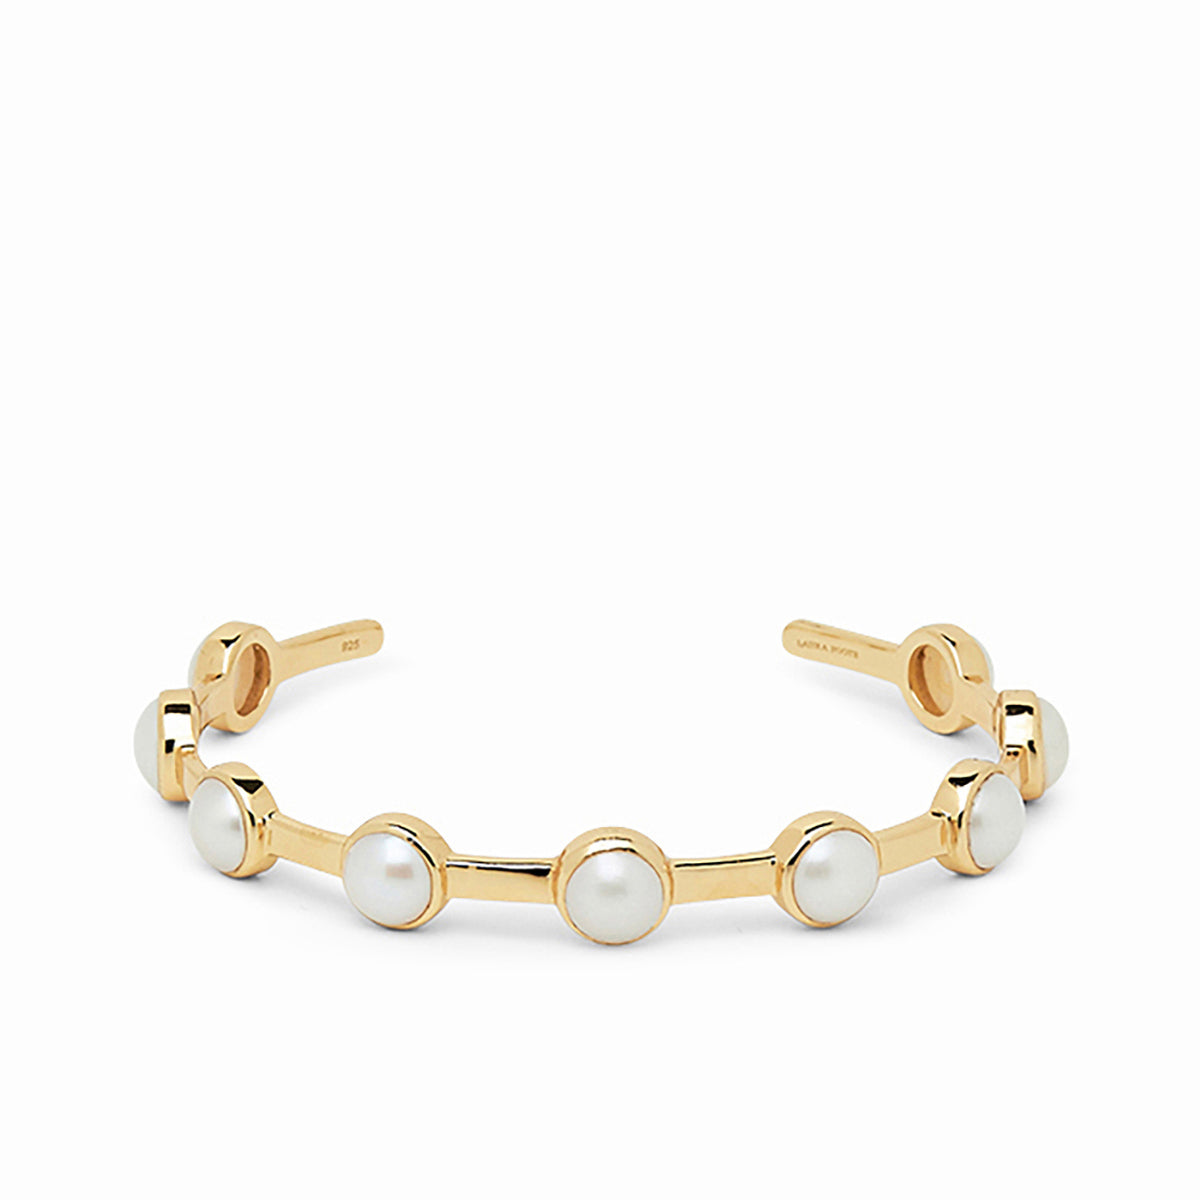 MANILAI Alloy Statement On The Cuff Bracelet Bangle For Women Chunky Big  Braces In Gold Color Fashion Jewelry Accessory 231116 From Shanye08, $8.57  | DHgate.Com